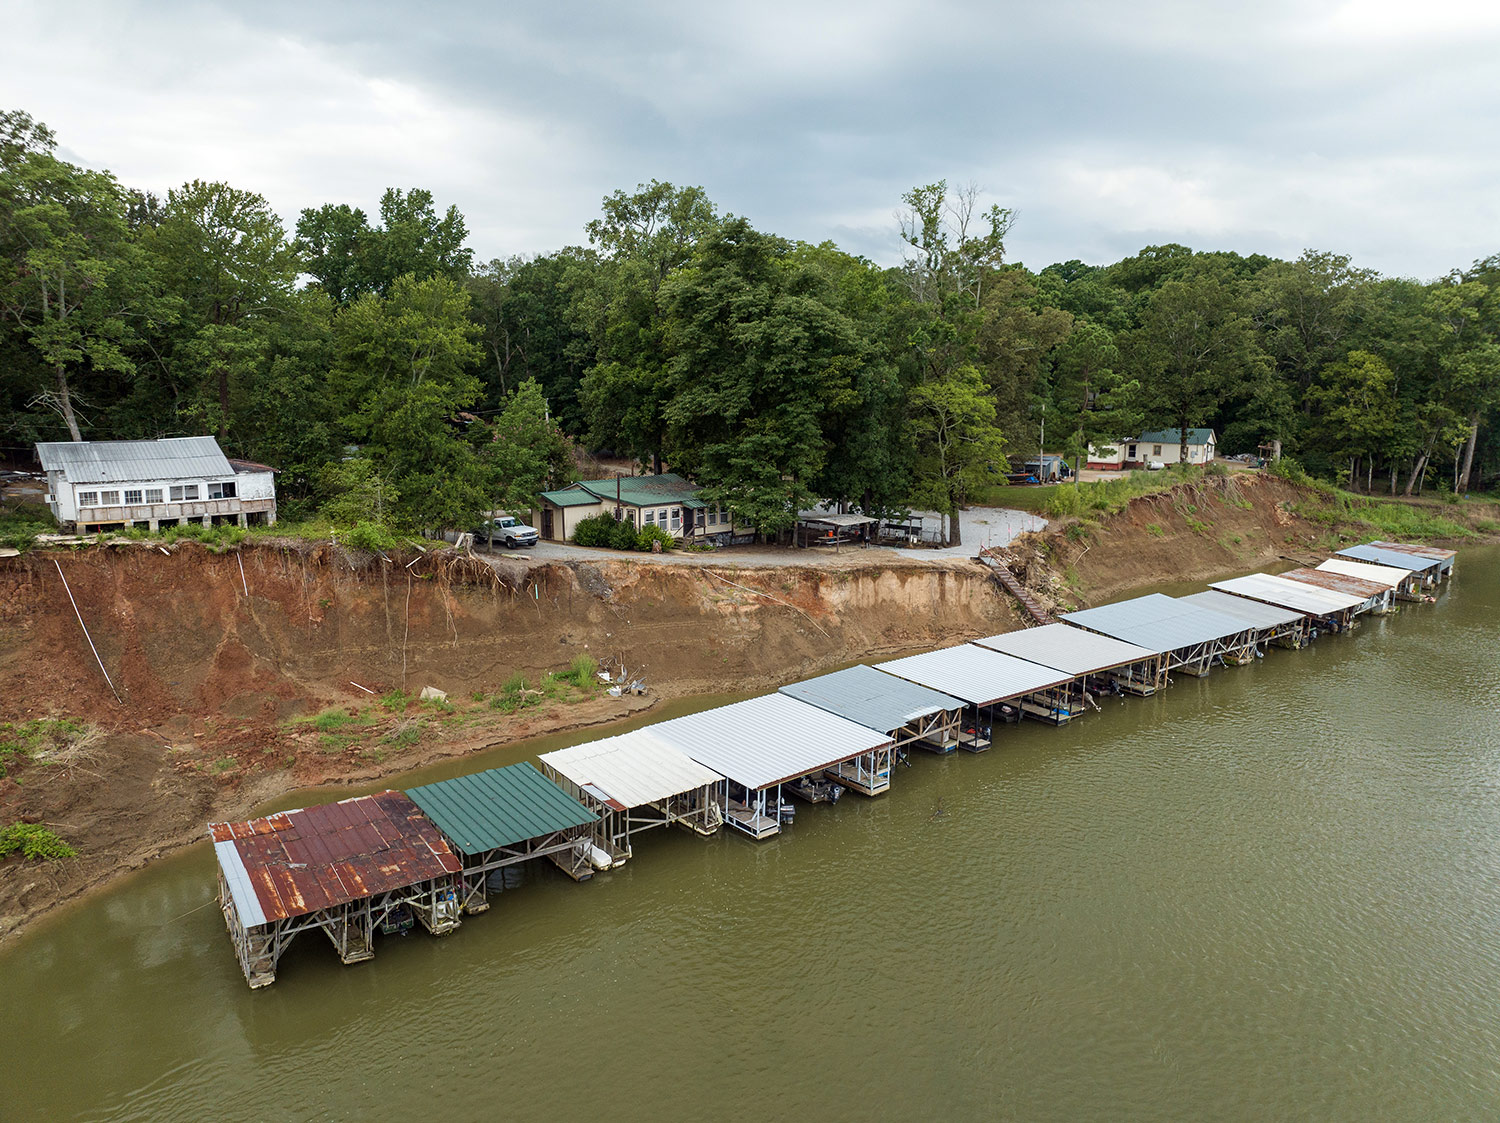 Docks on the White River, Arkansas, in front of eroded riverbank. Houses in the background.